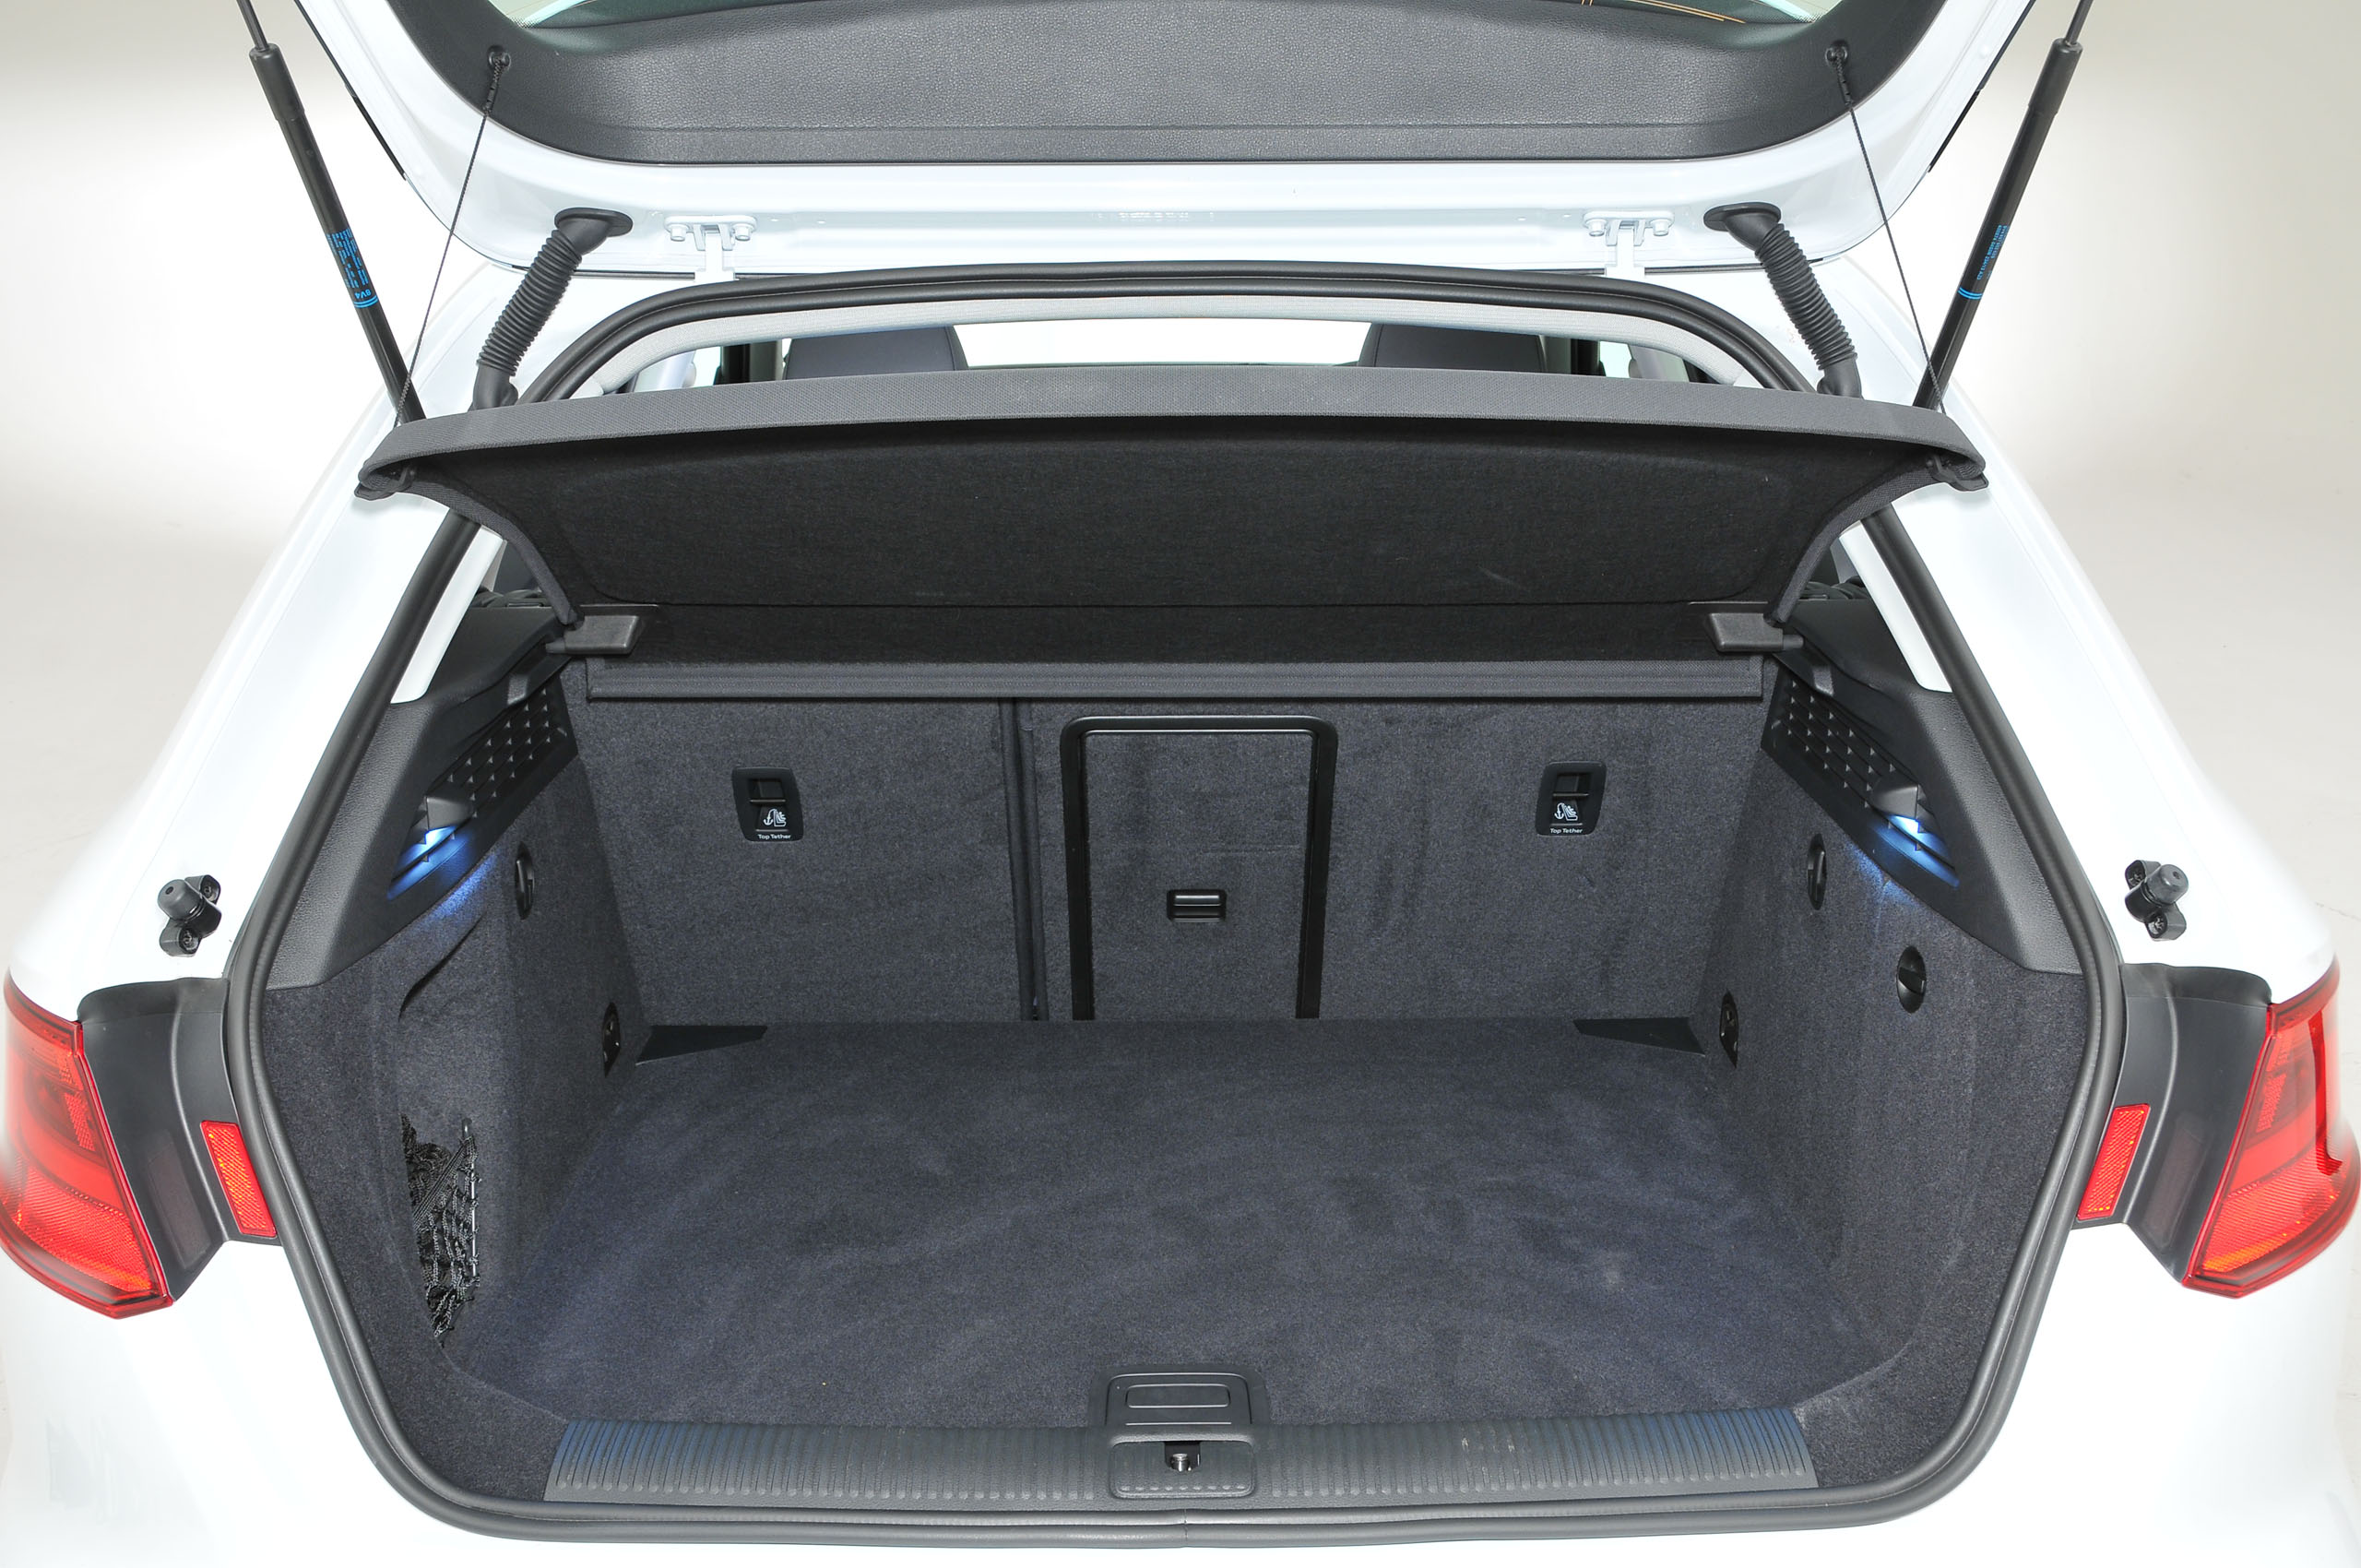 Audi A3 Sportback dimensions, boot space and electrification